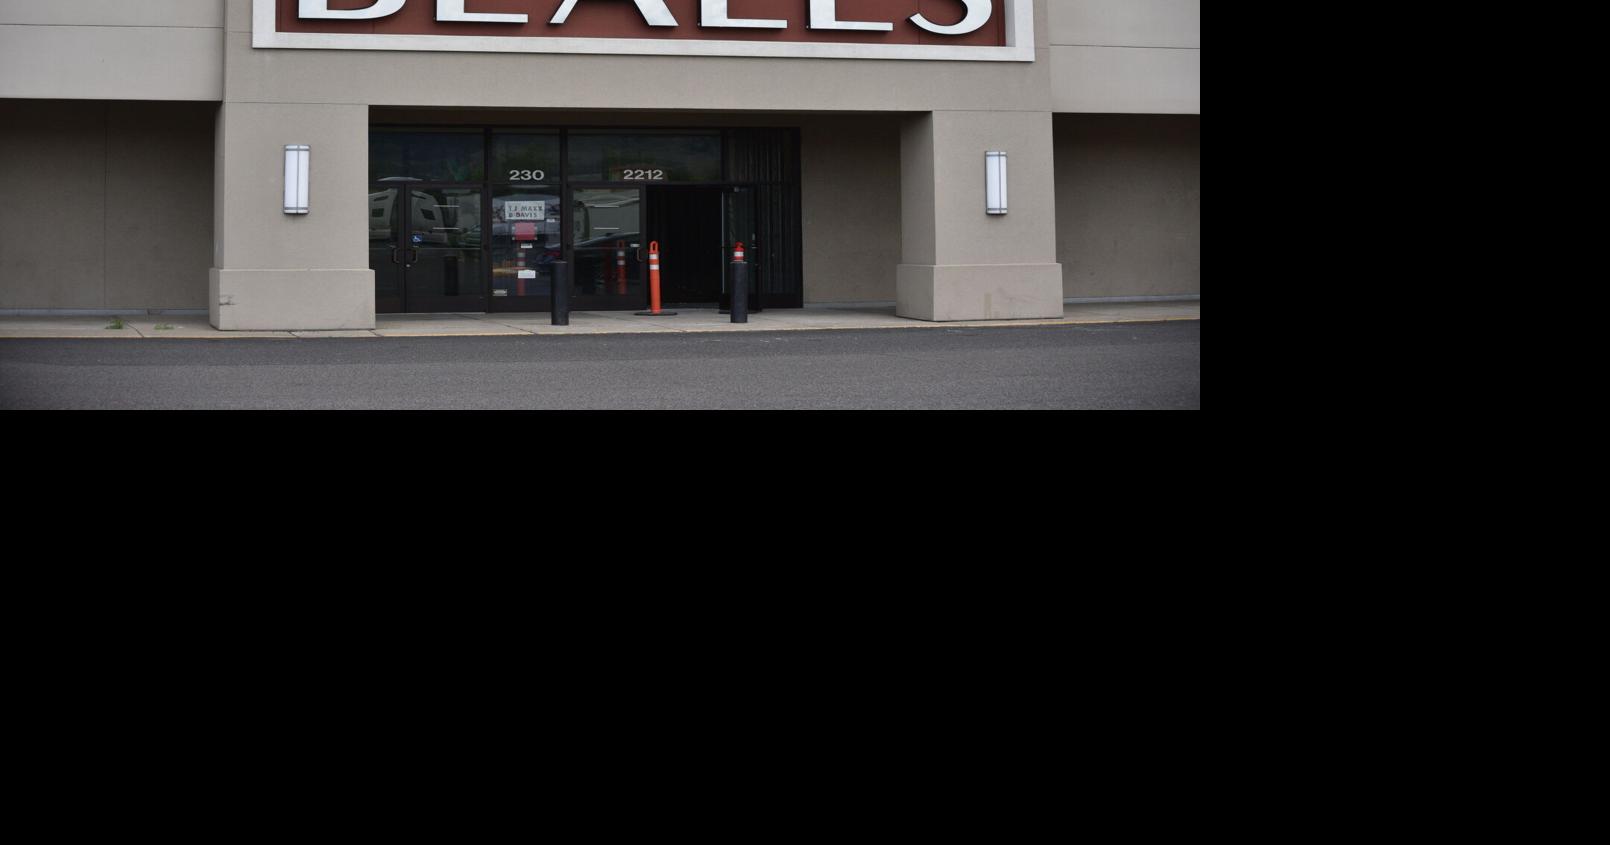 TJ Maxx, Marshalls reopen online stores with limited access